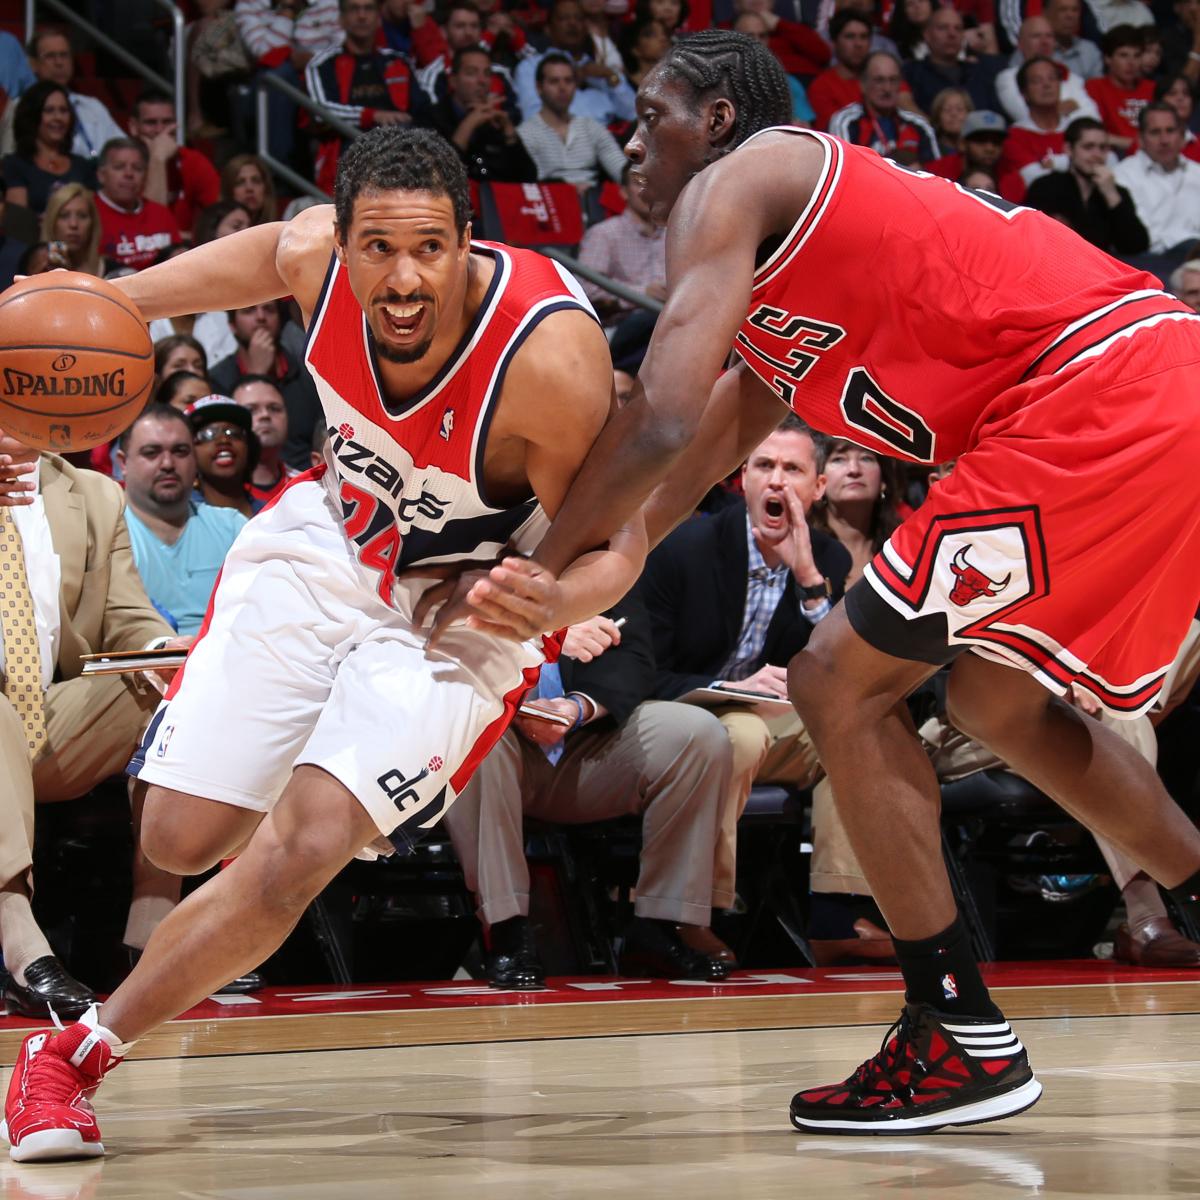 The Basketball Podcast: EP279 with Andre Miller on NBA Playing and